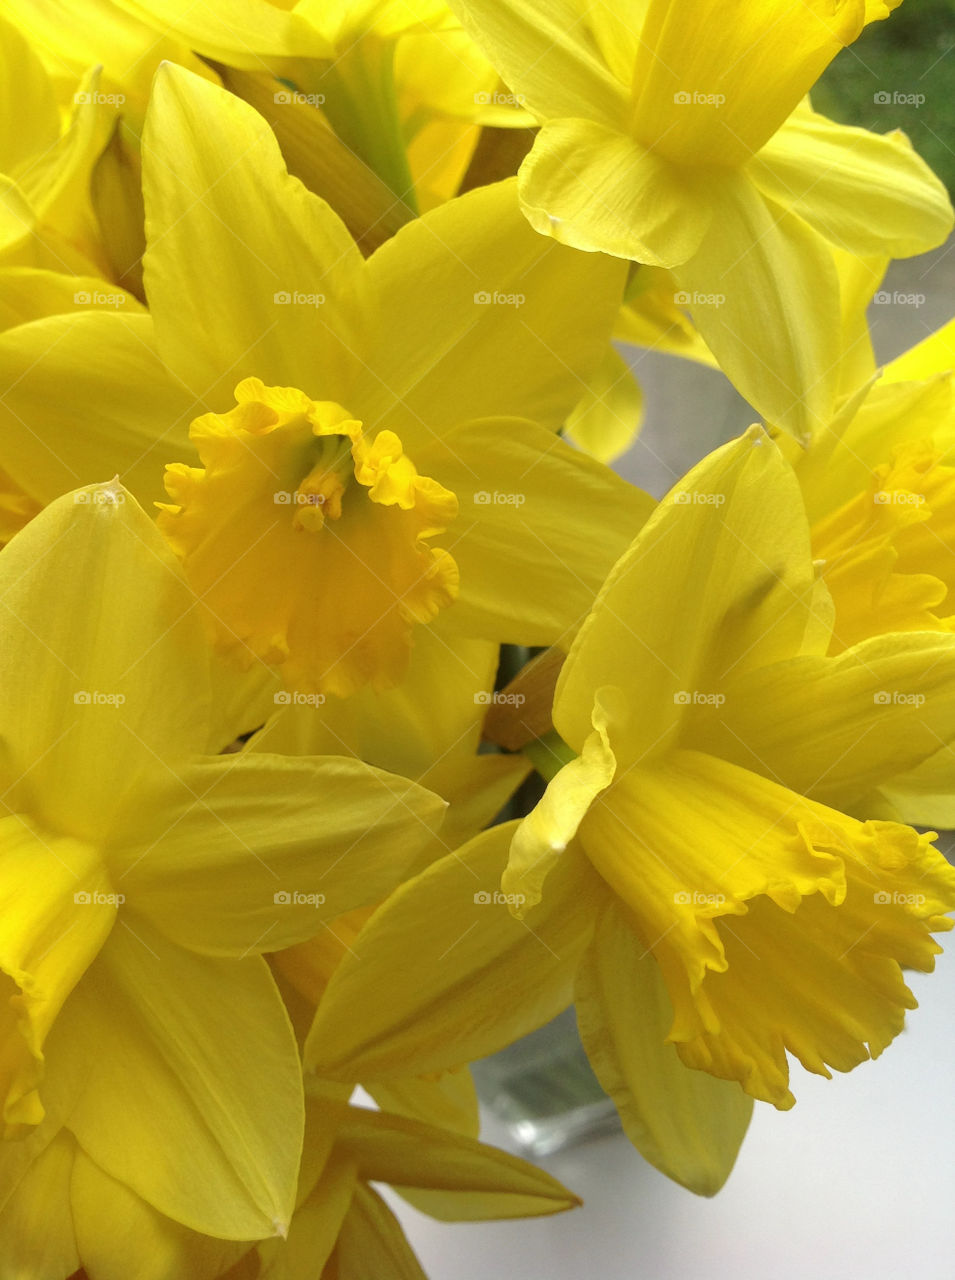 Extreme close up of yellow flowers